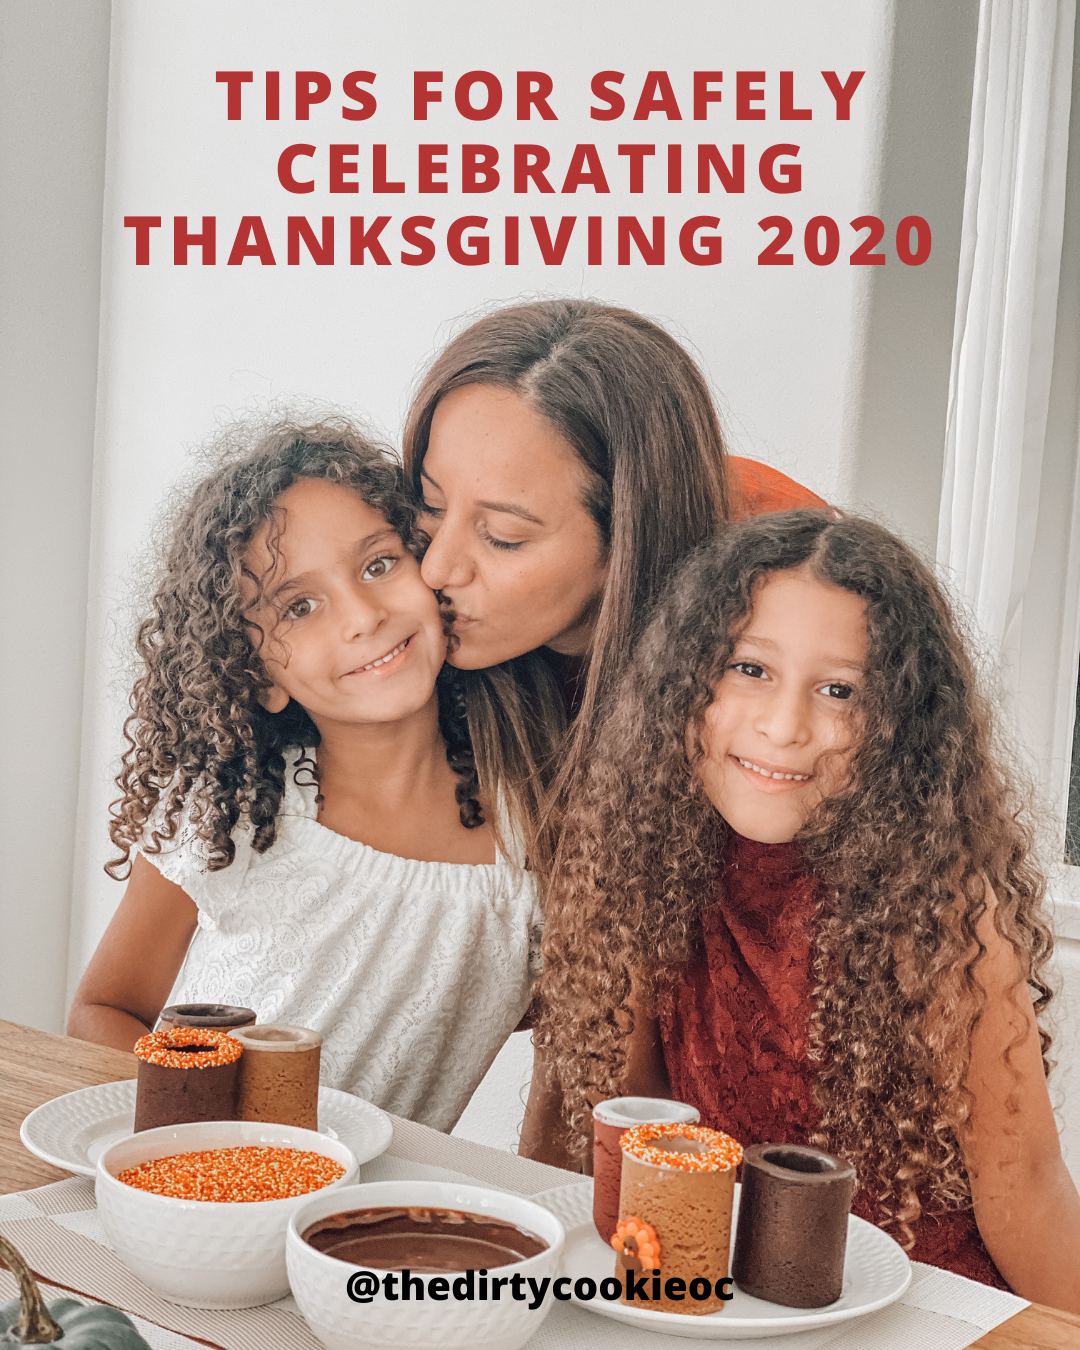 Tips for a Celebrating Thanksgiving Safely During COVID-19